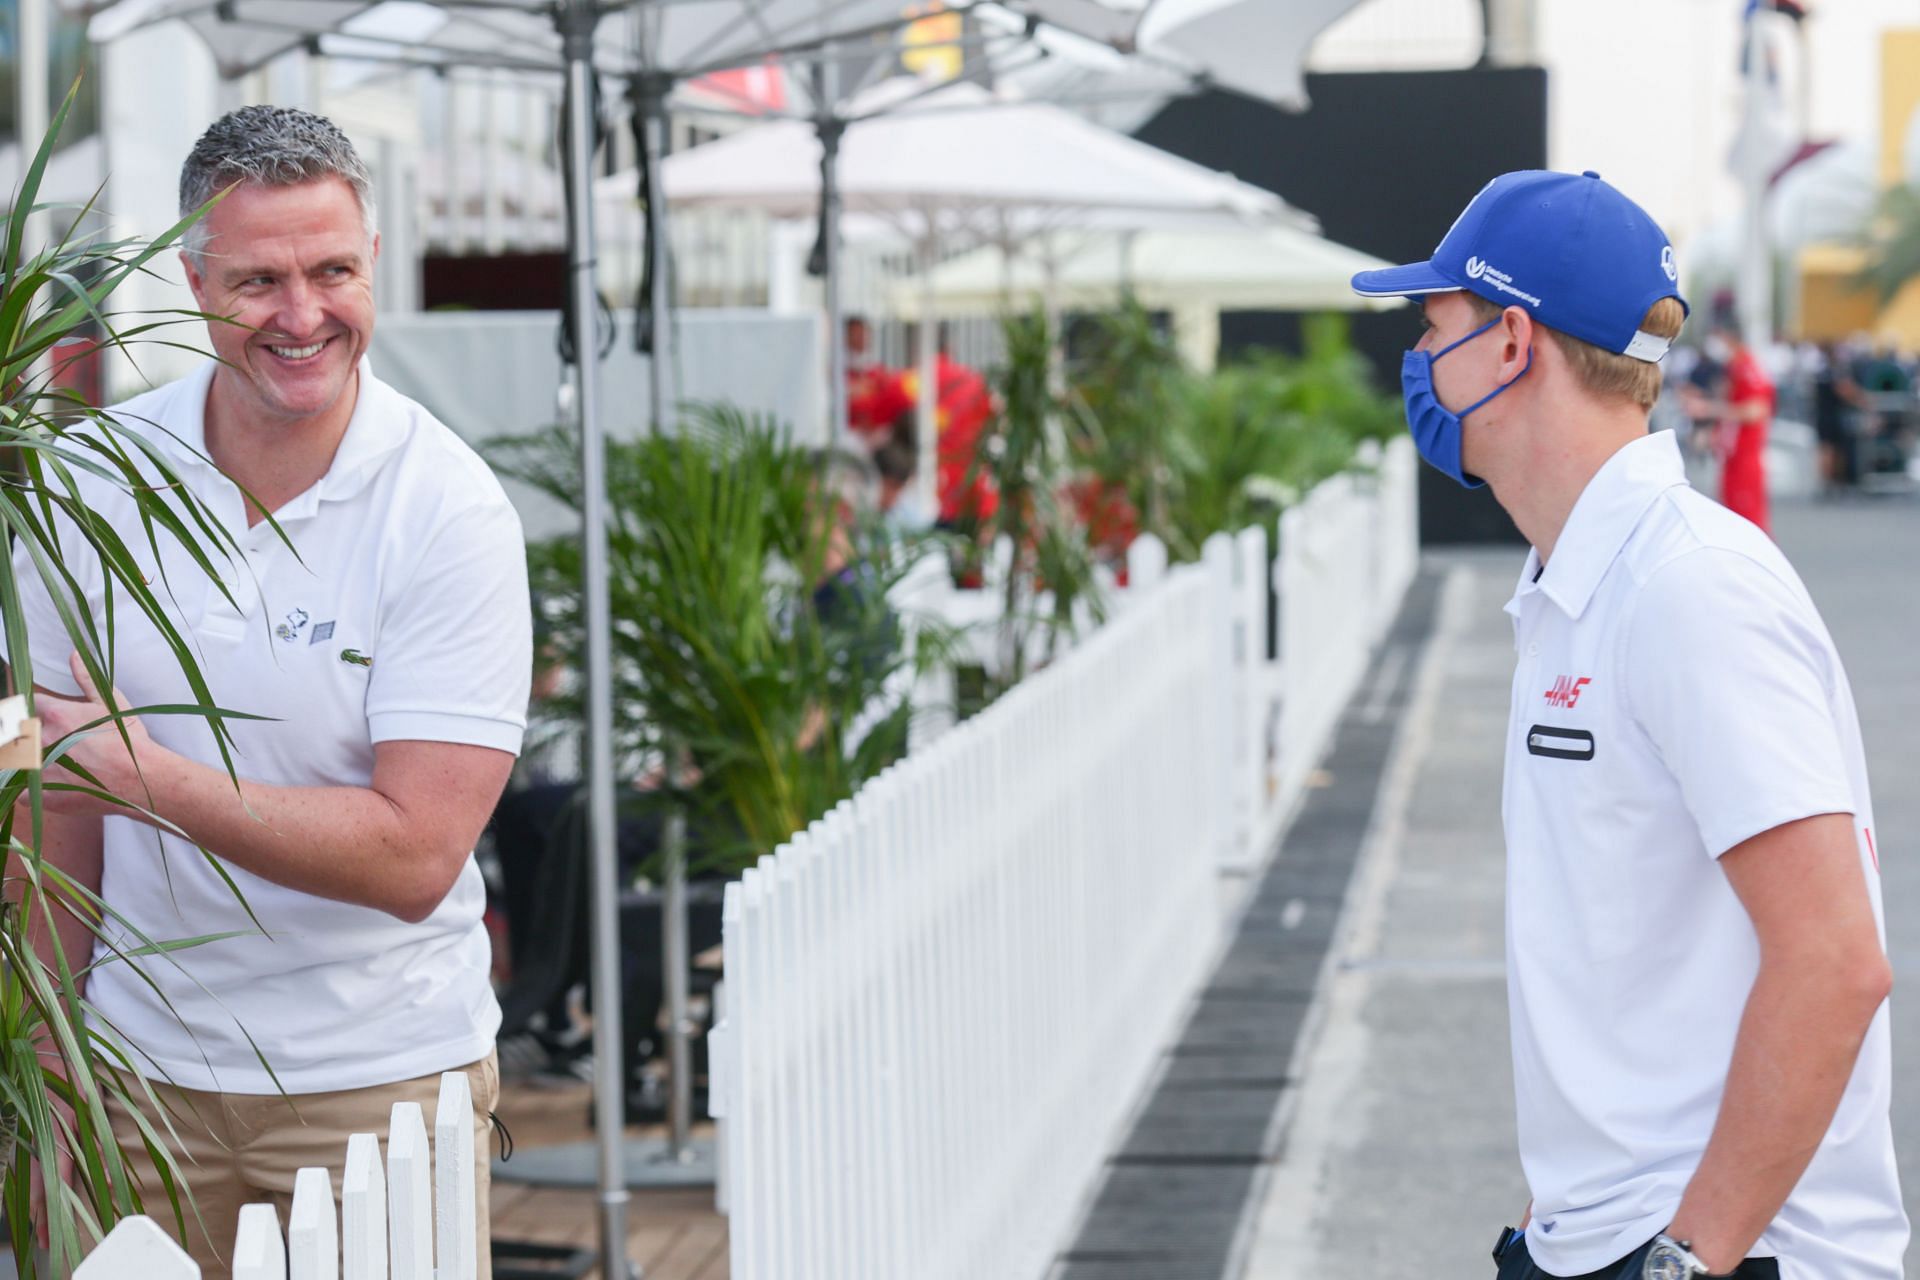 Ralf Schumacher (left) with nephew Mick (right) during the F1 Grand Prix of Qatar - Previews